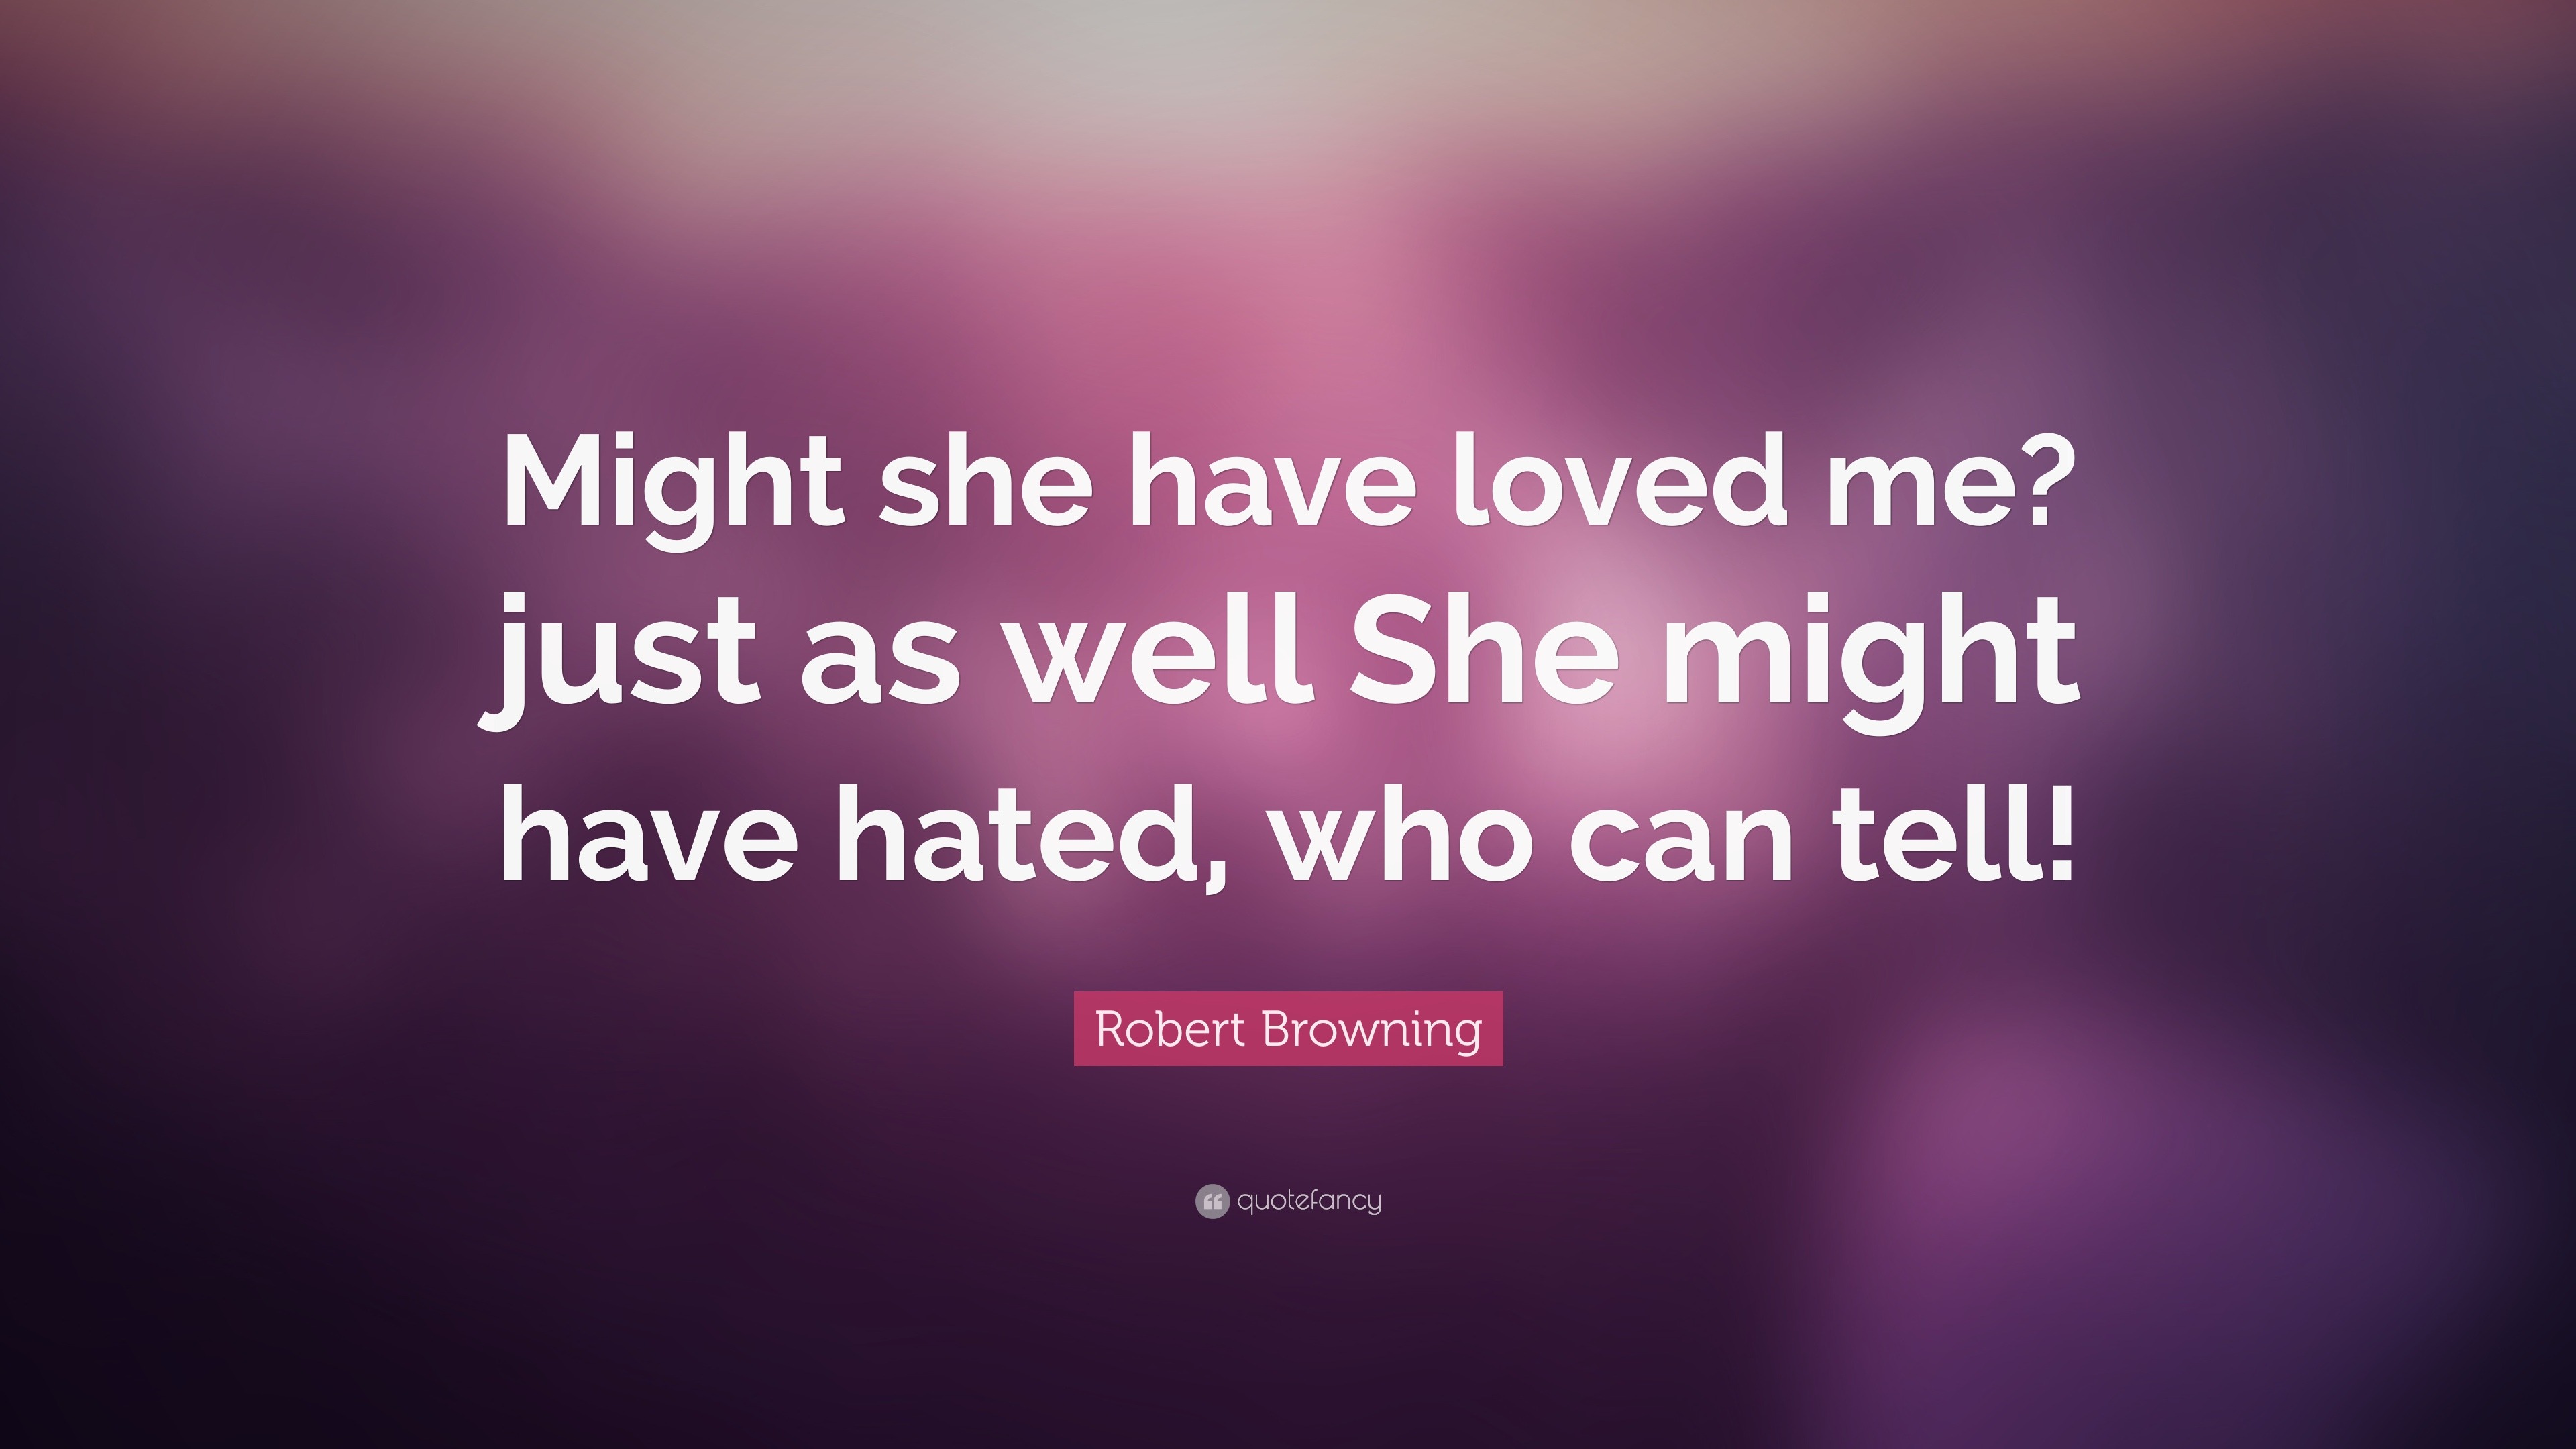 Robert Browning Quote: “Might she have loved me? just as well She might ...